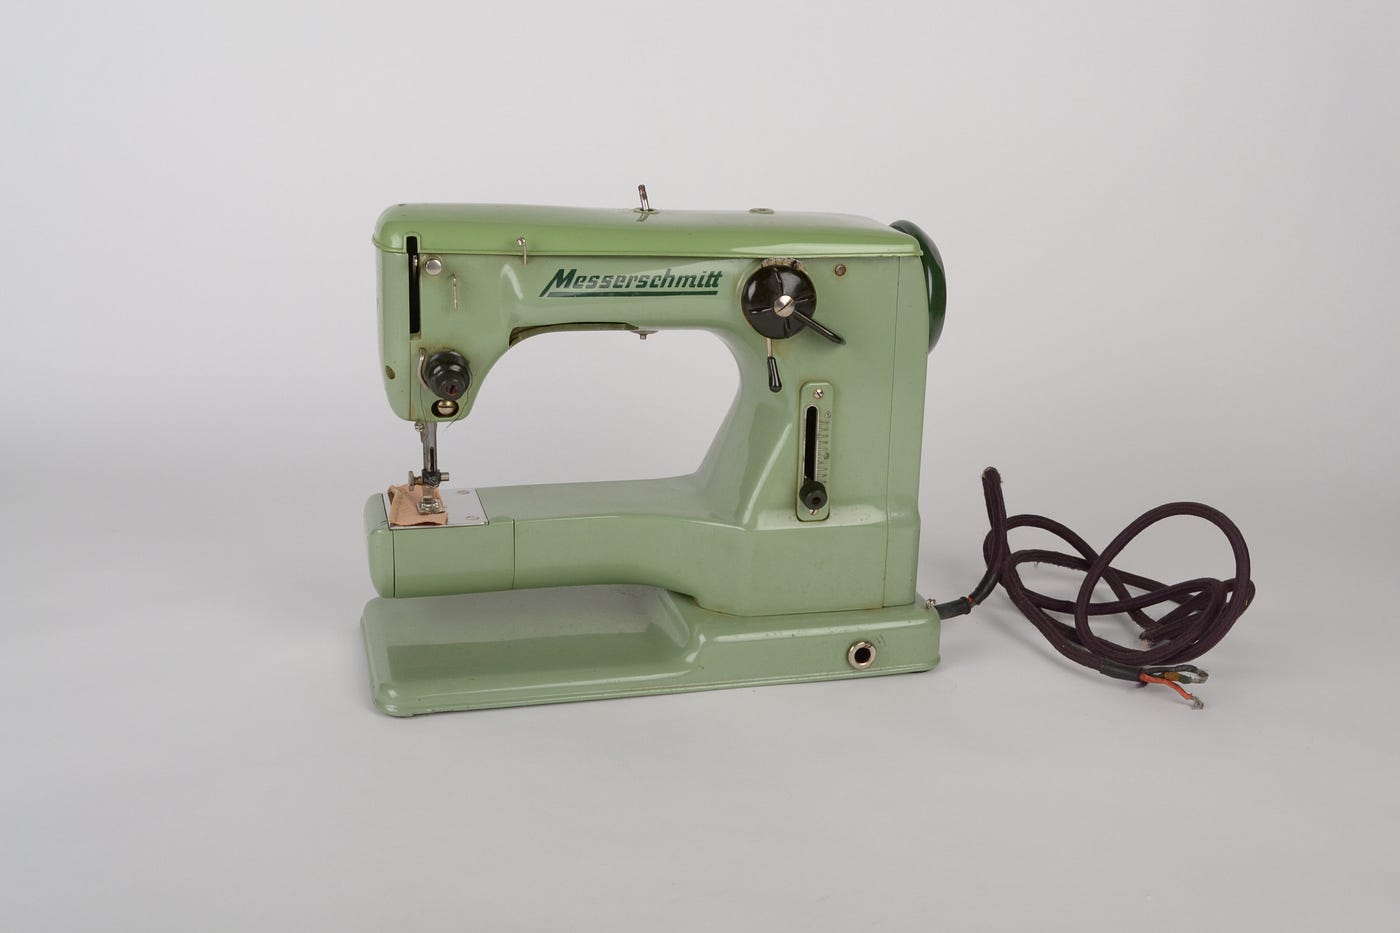 Sew Fun Children Kids Toy Green and Blue Sewing Machine with Pedal and Crank